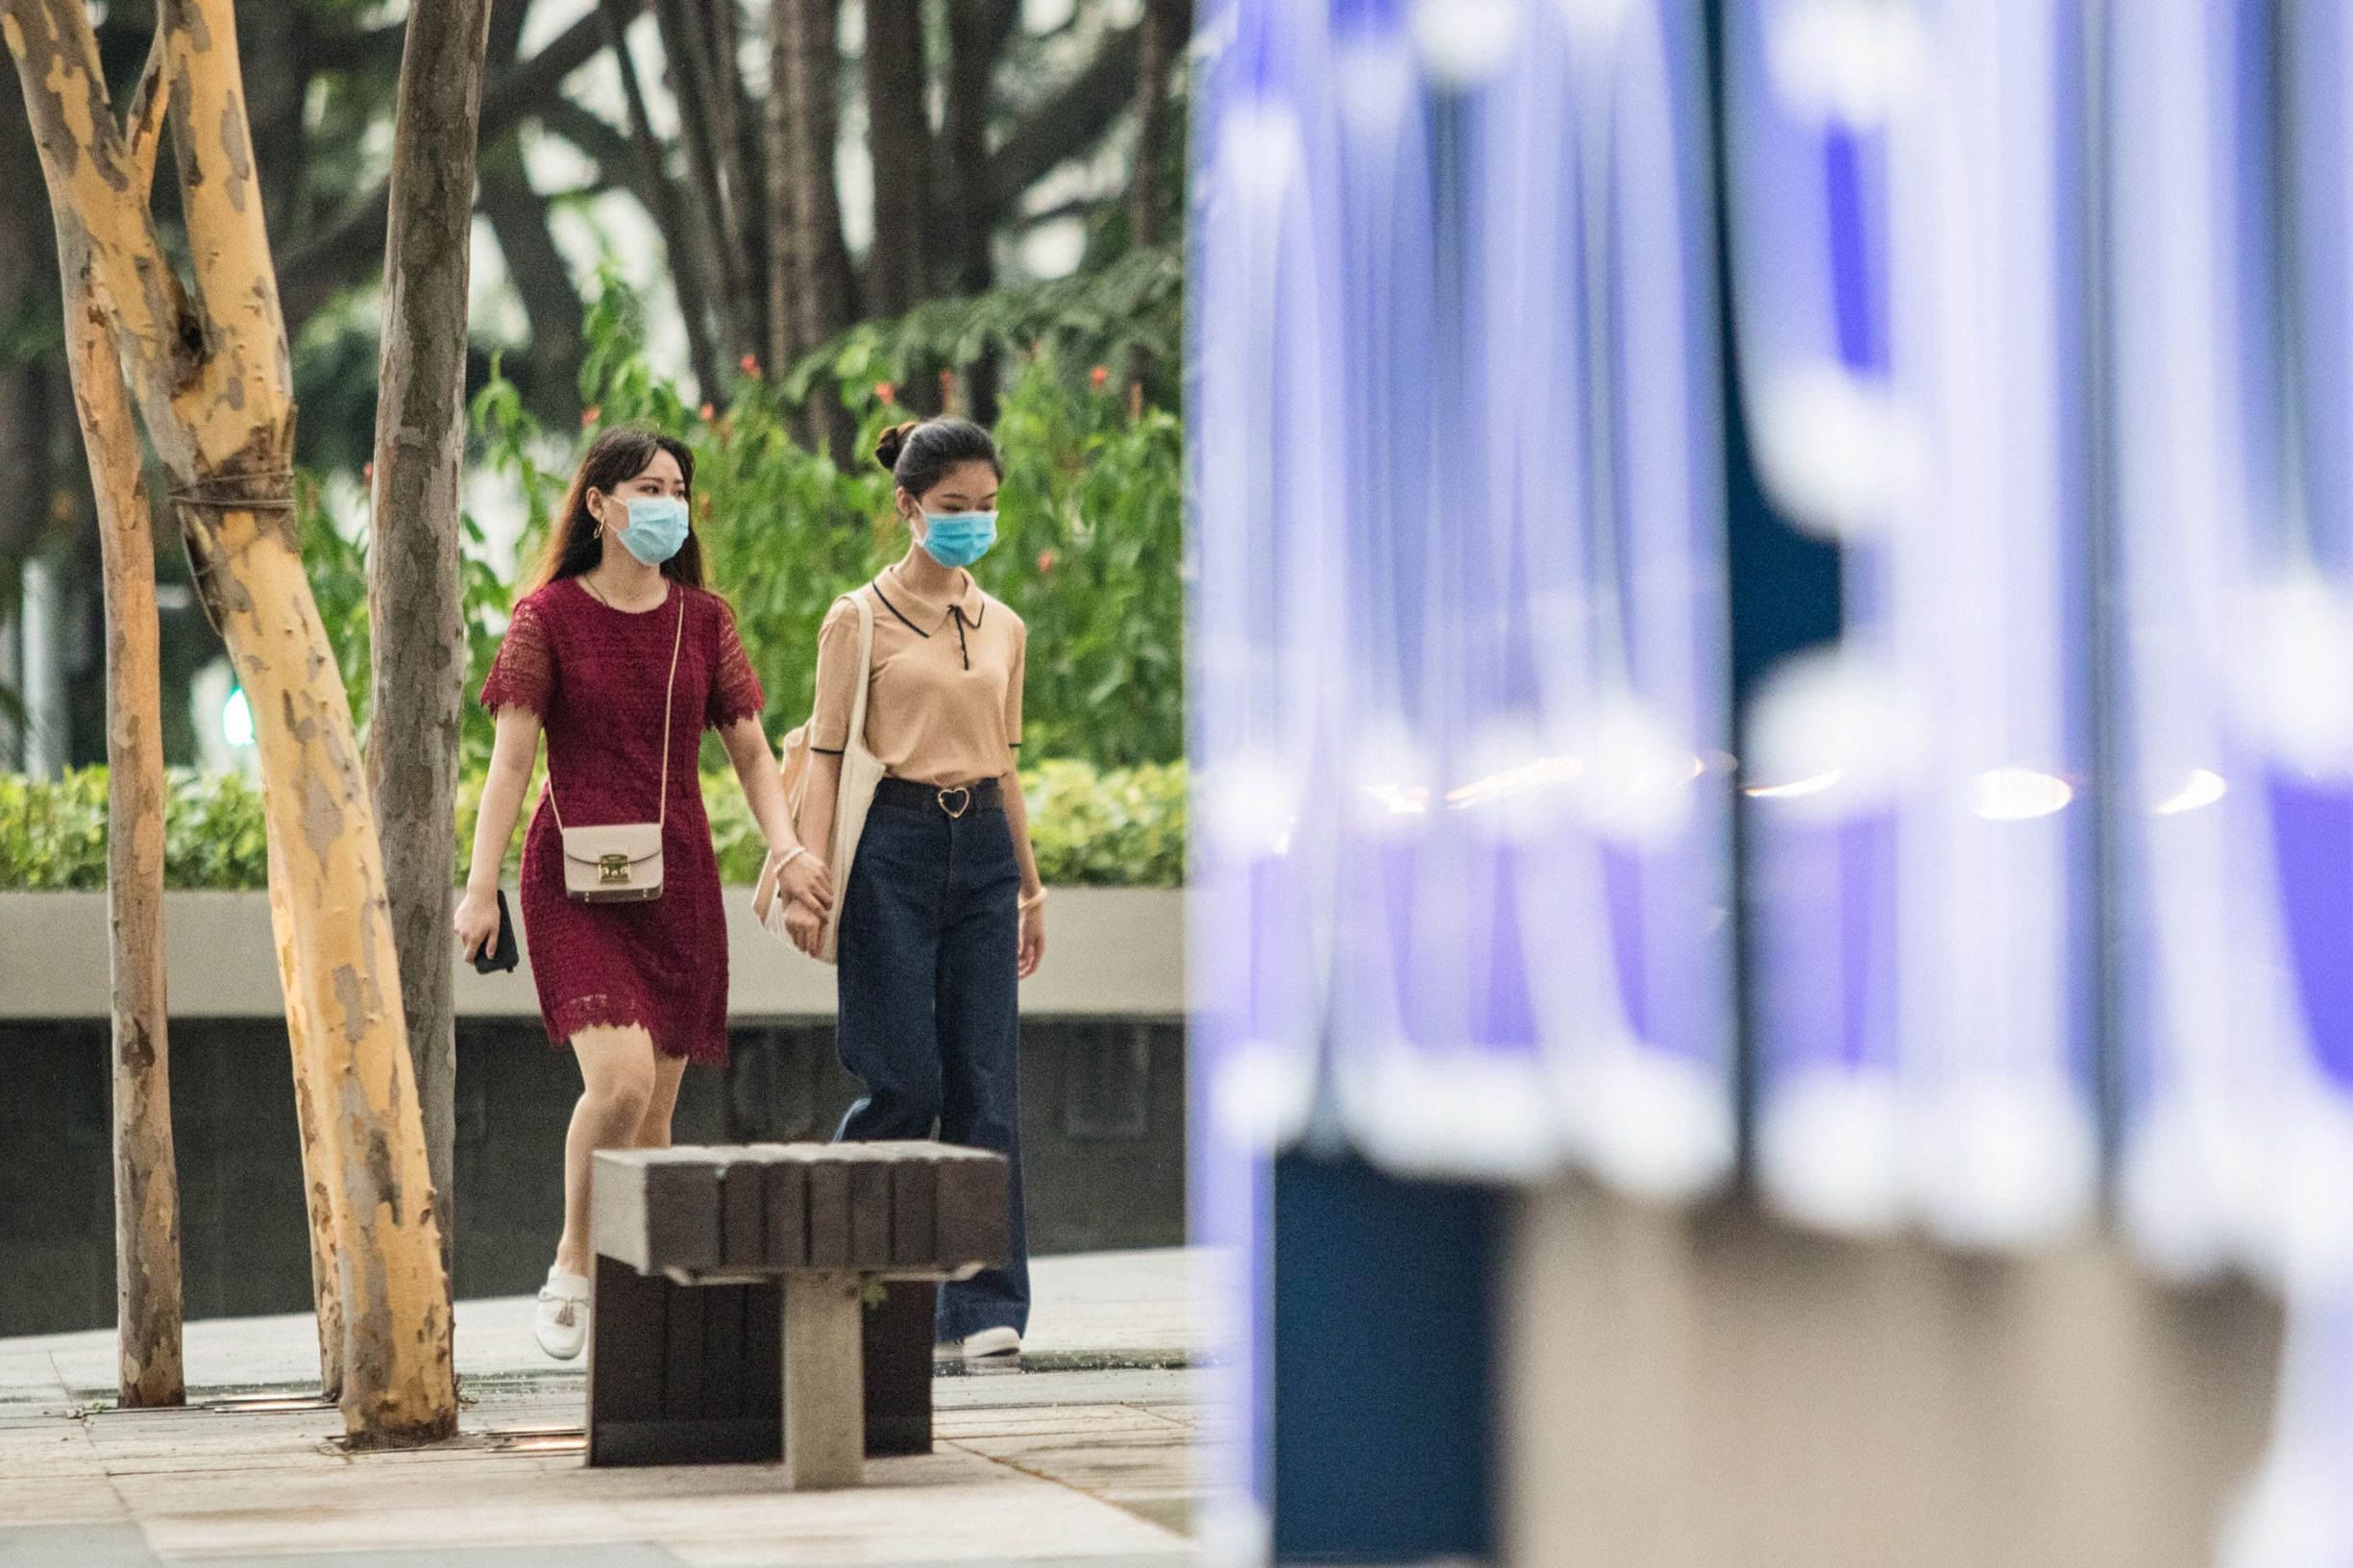 Women wear facemasks amid fears of the COVID-19 novel coronavirus in the Orchard Road shopping district in Singapore on March 10, 2020. (Photo by Louis KWOK / AFP)